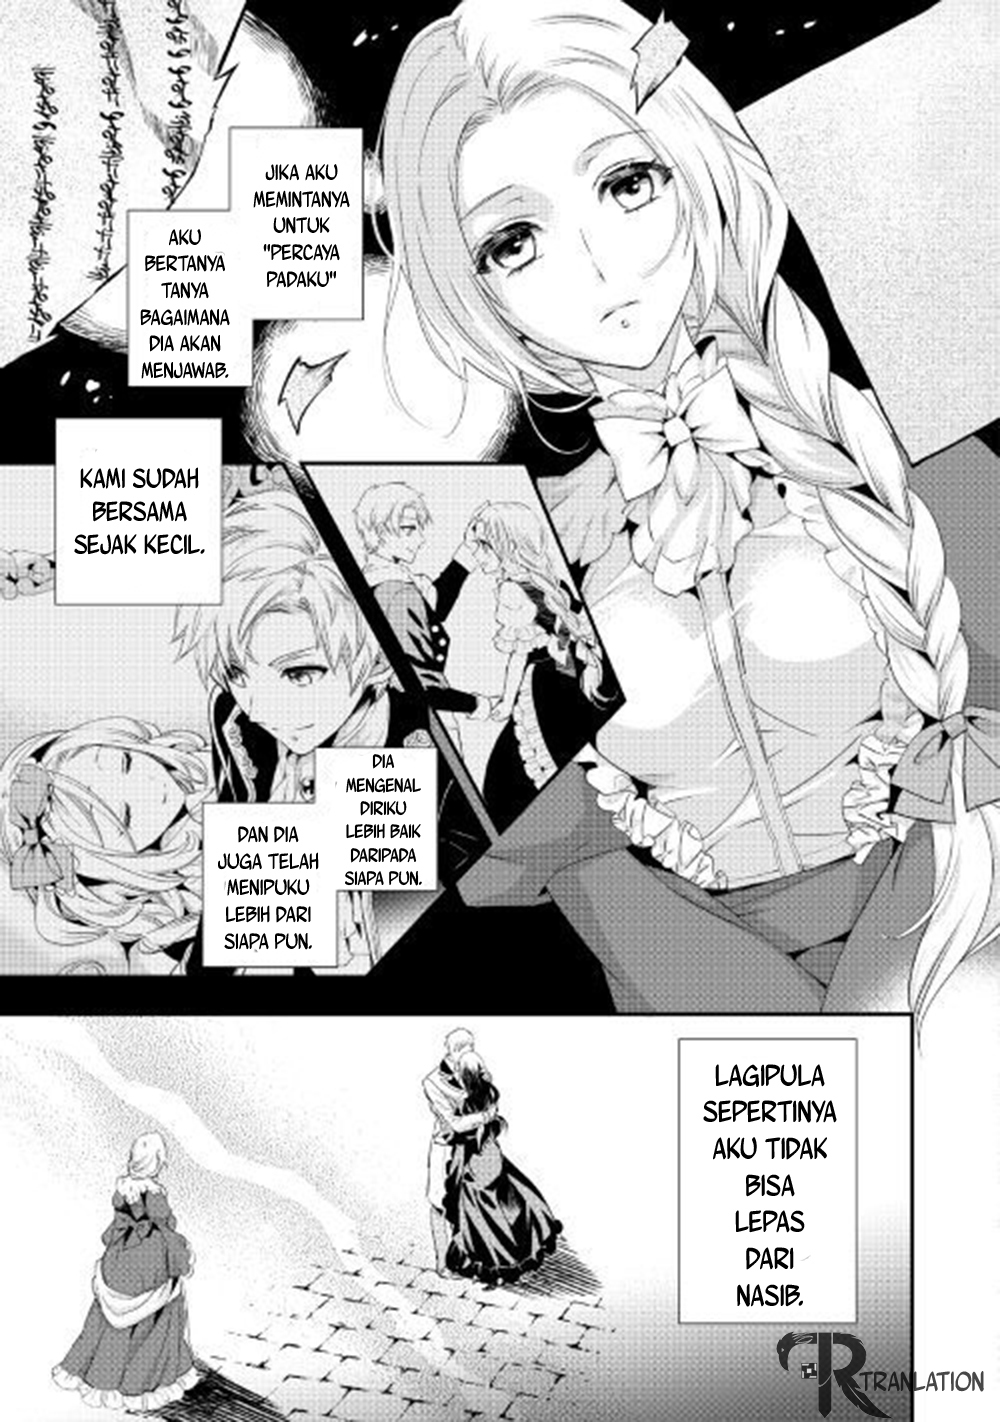 Milady Just Wants to Relax Chapter 01 16